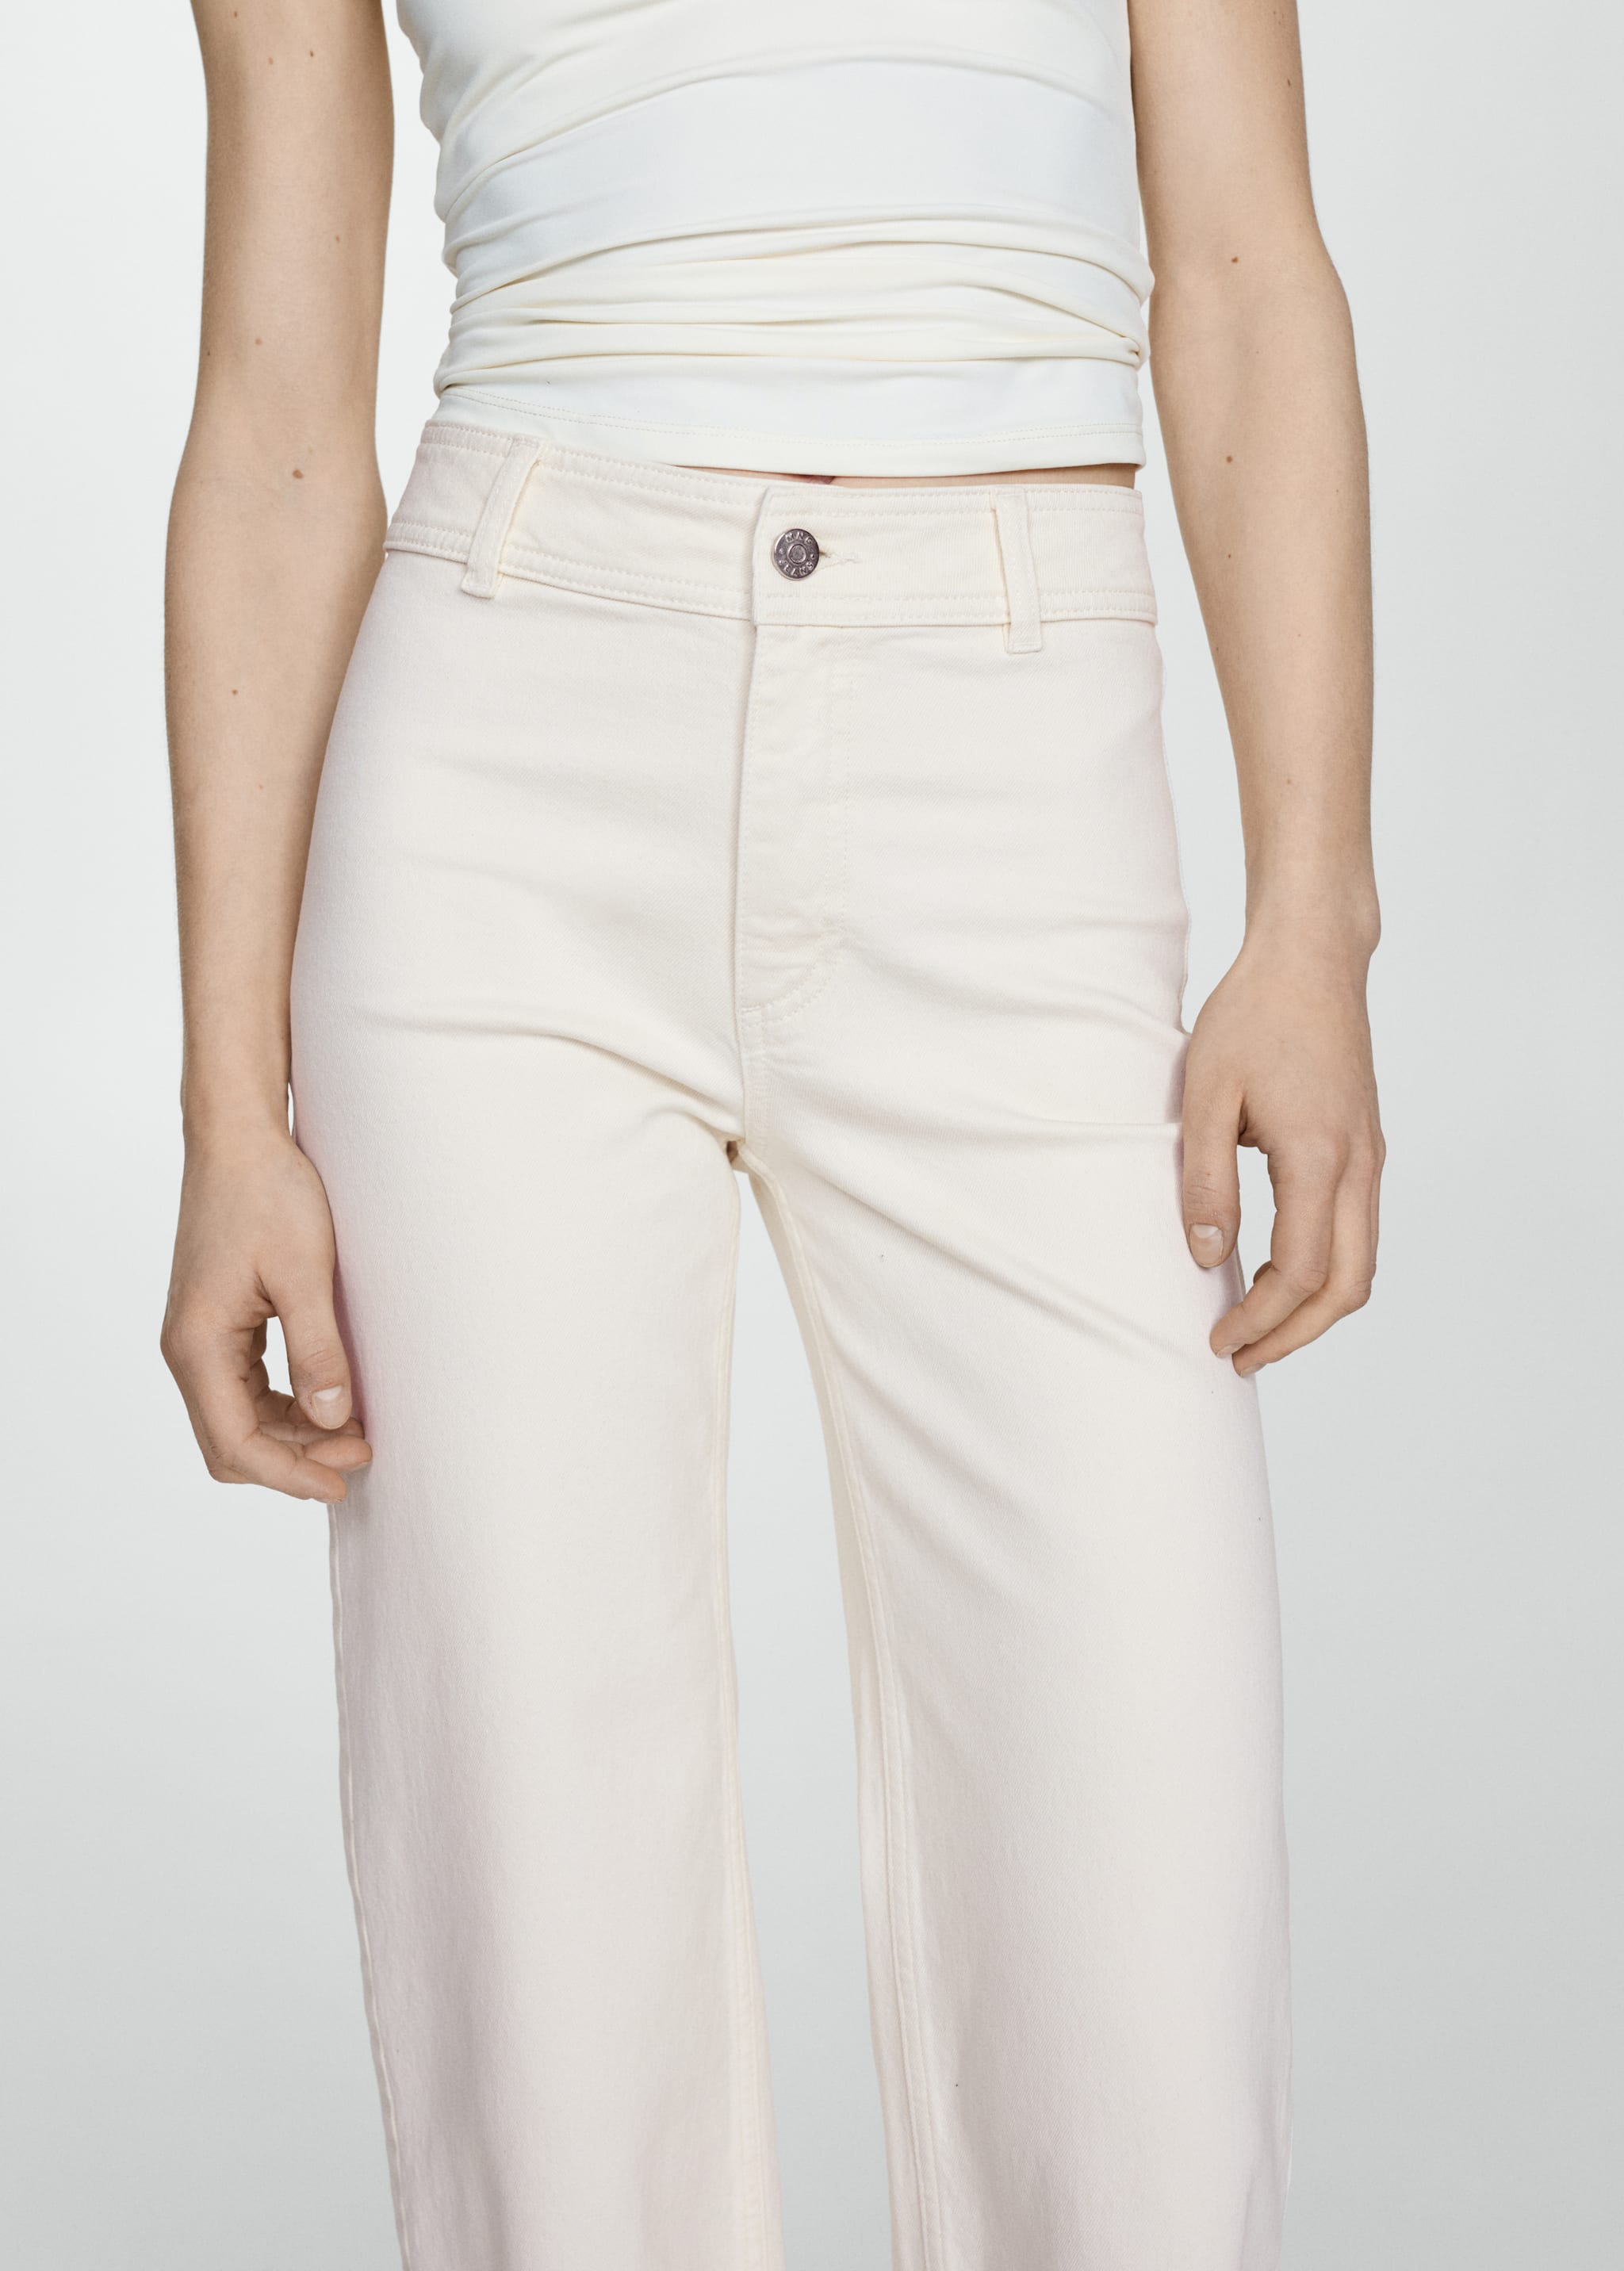 Catherin culotte high rise jeans - Details of the article 2